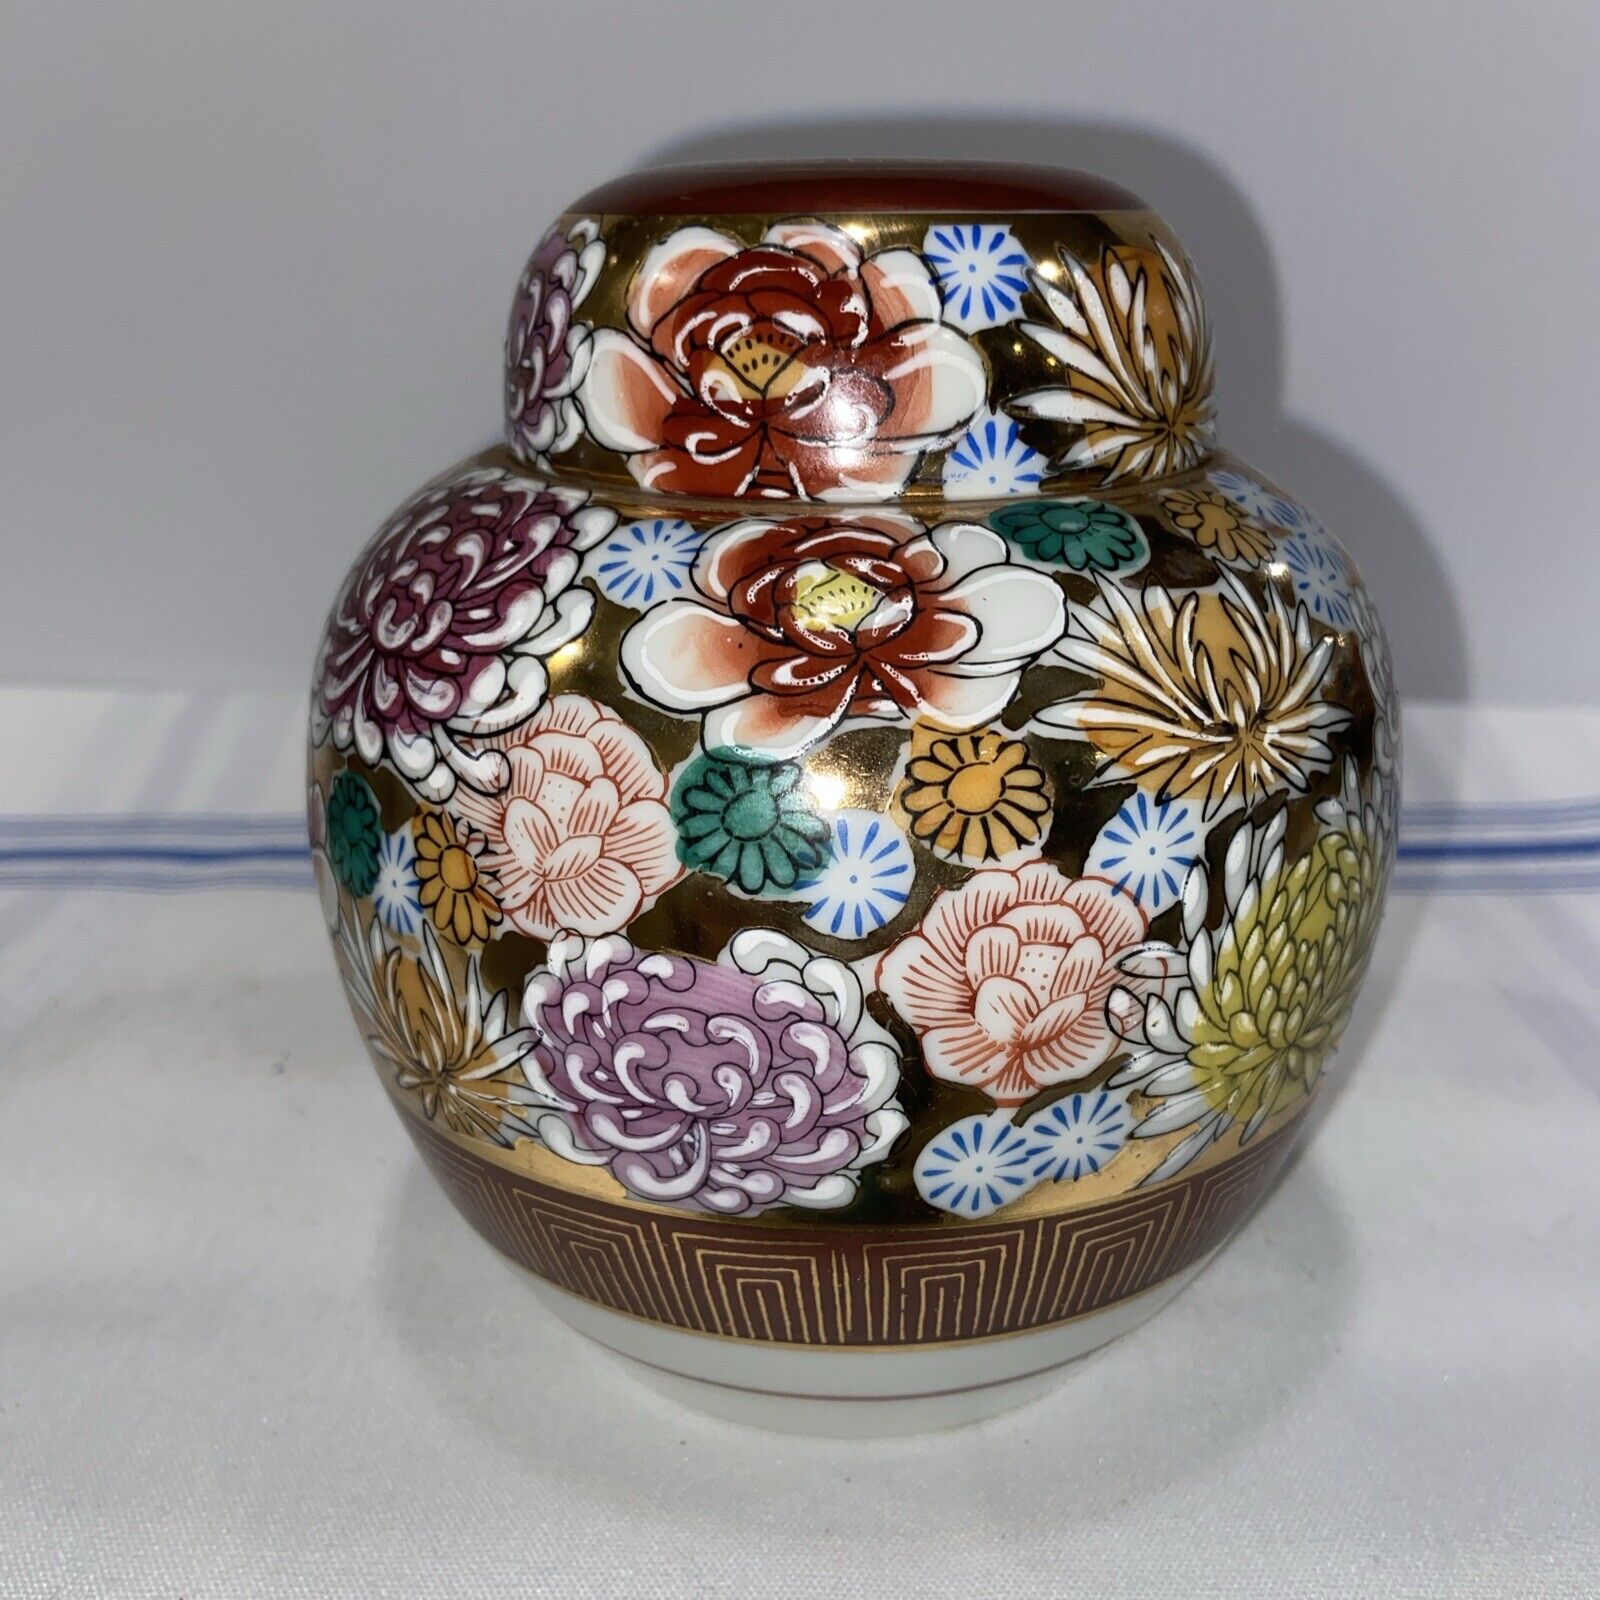 Japanese/Chinese Kutani Ginger Jar with Beautiful Vivid Floral Patern 5.5 inches